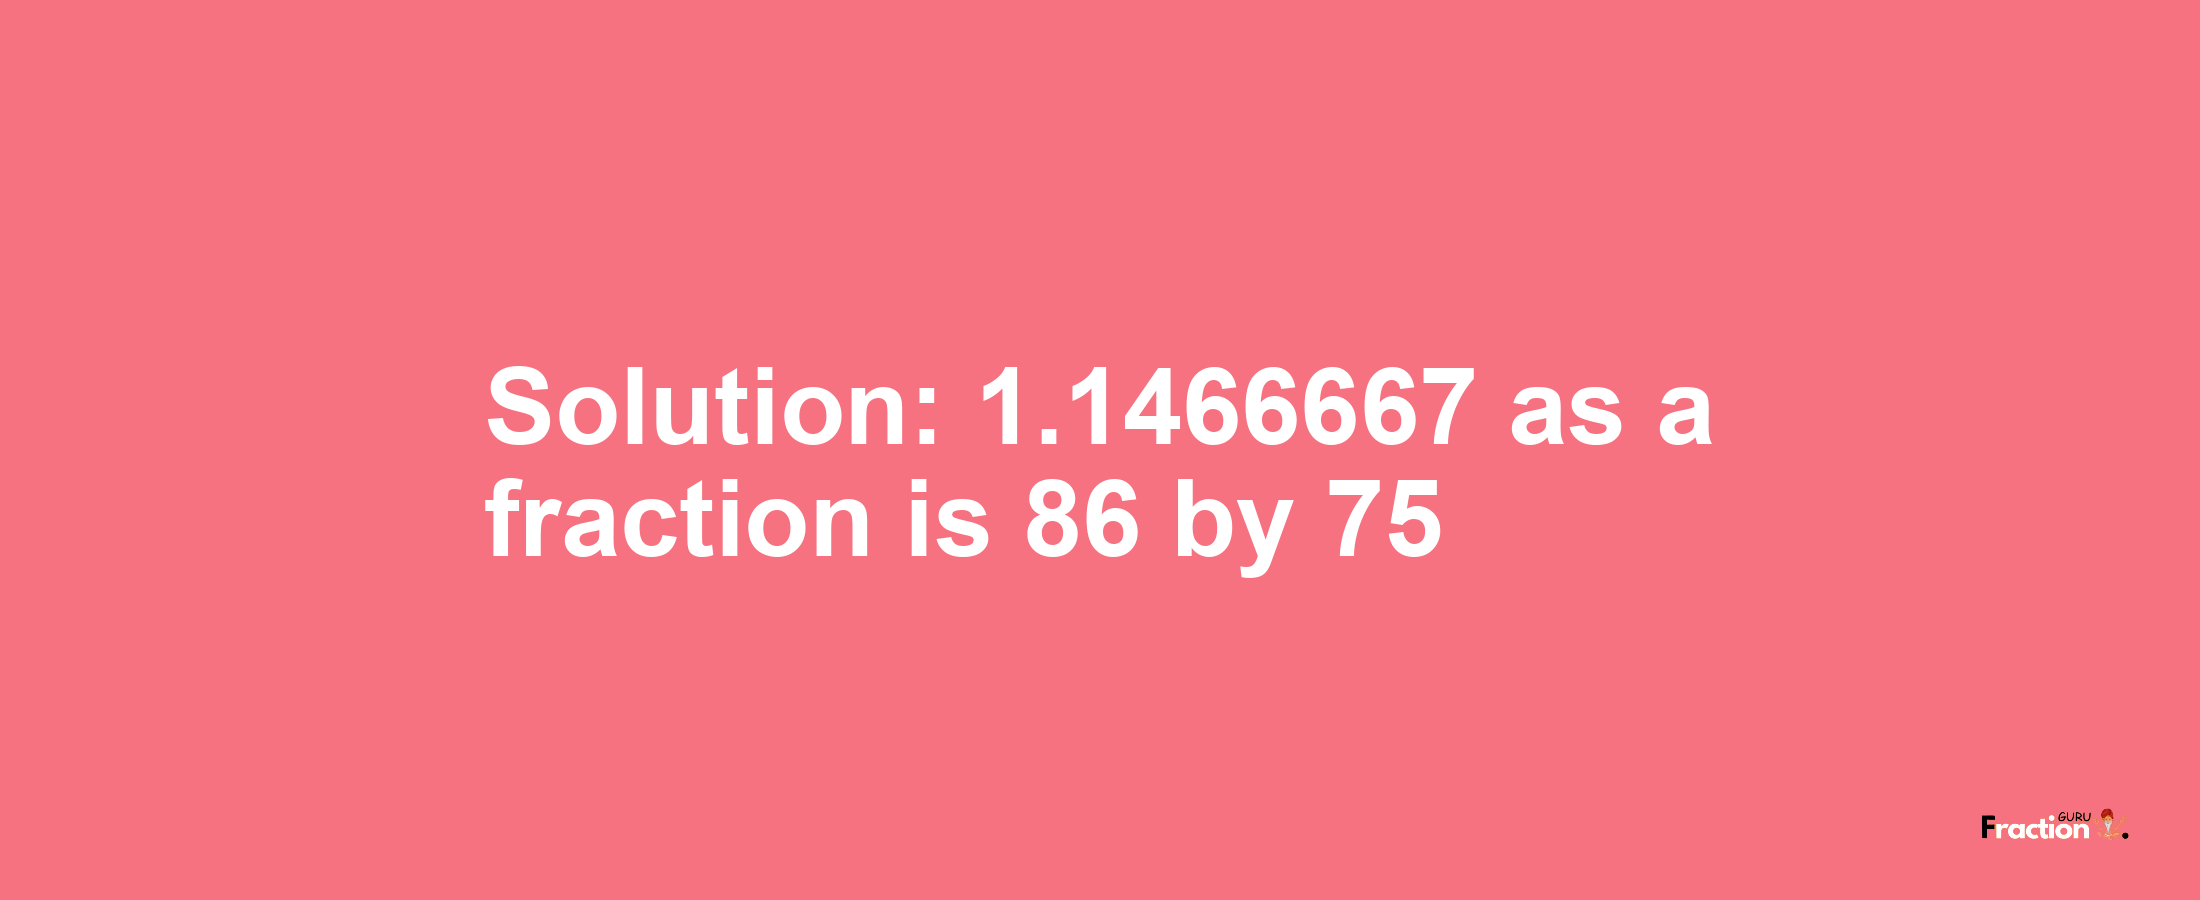 Solution:1.1466667 as a fraction is 86/75